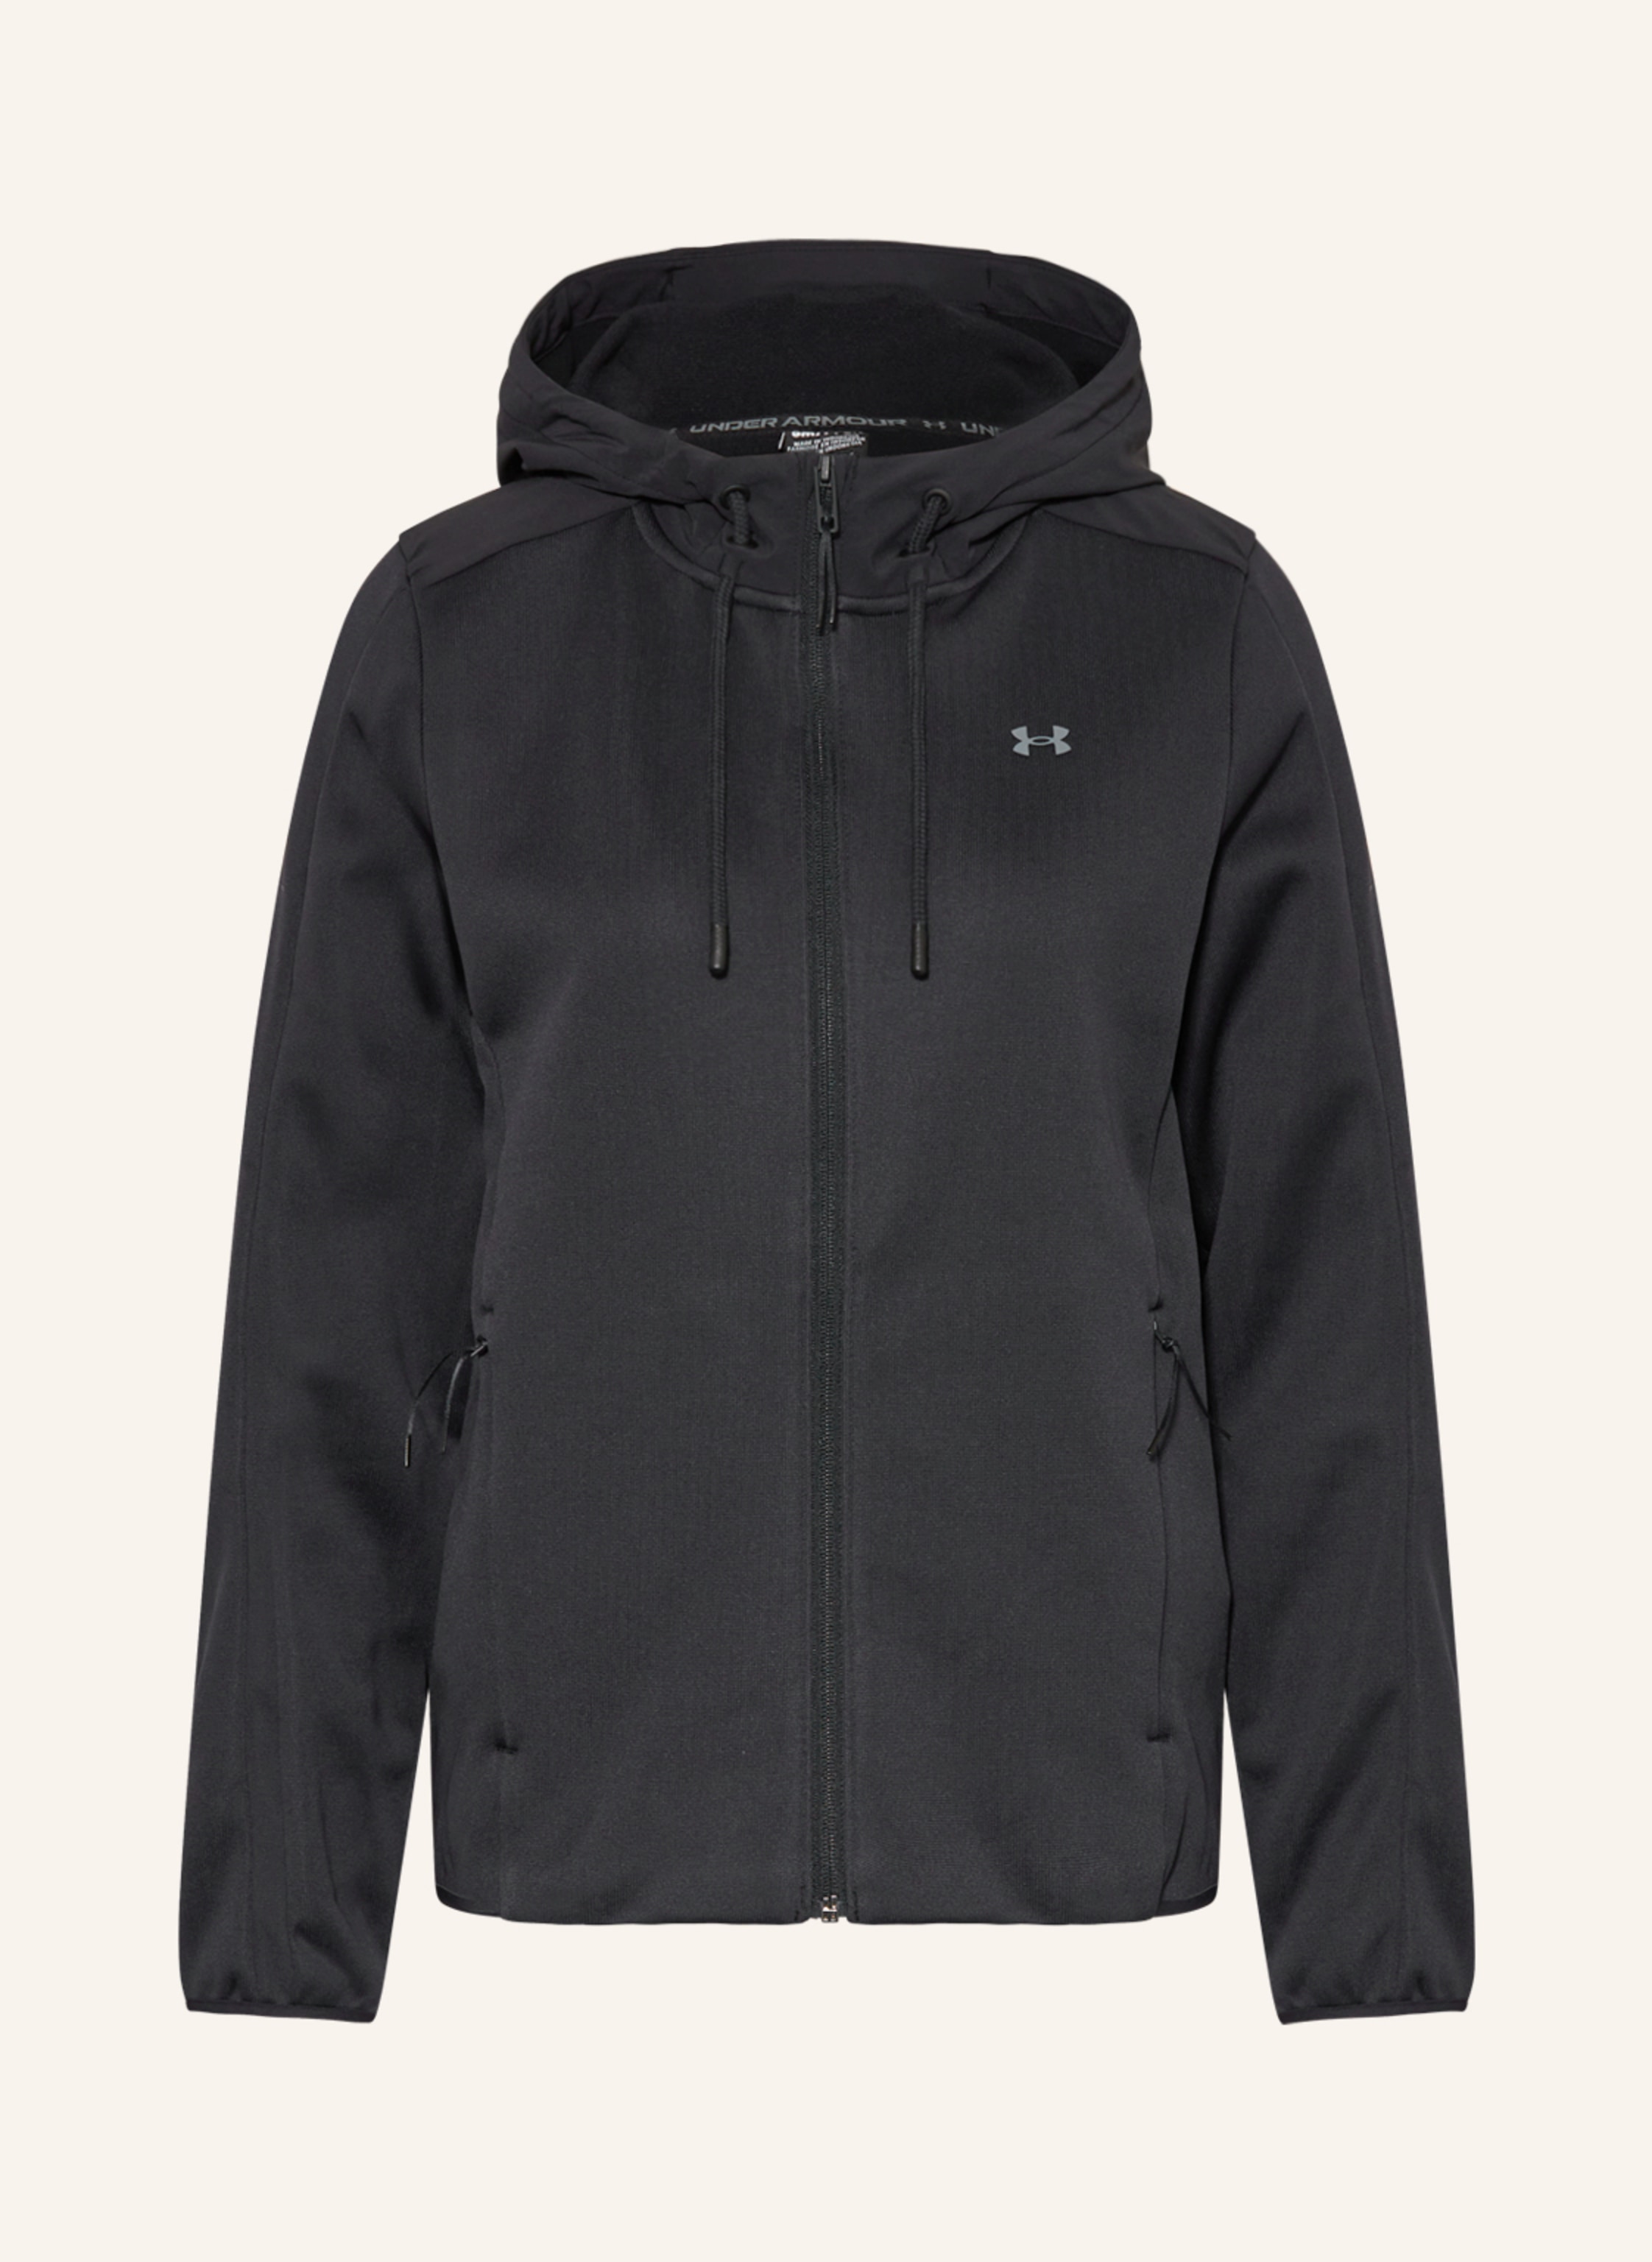 Under Armour UA Unstoppable GORE® WINDSTOPPER® Bomber